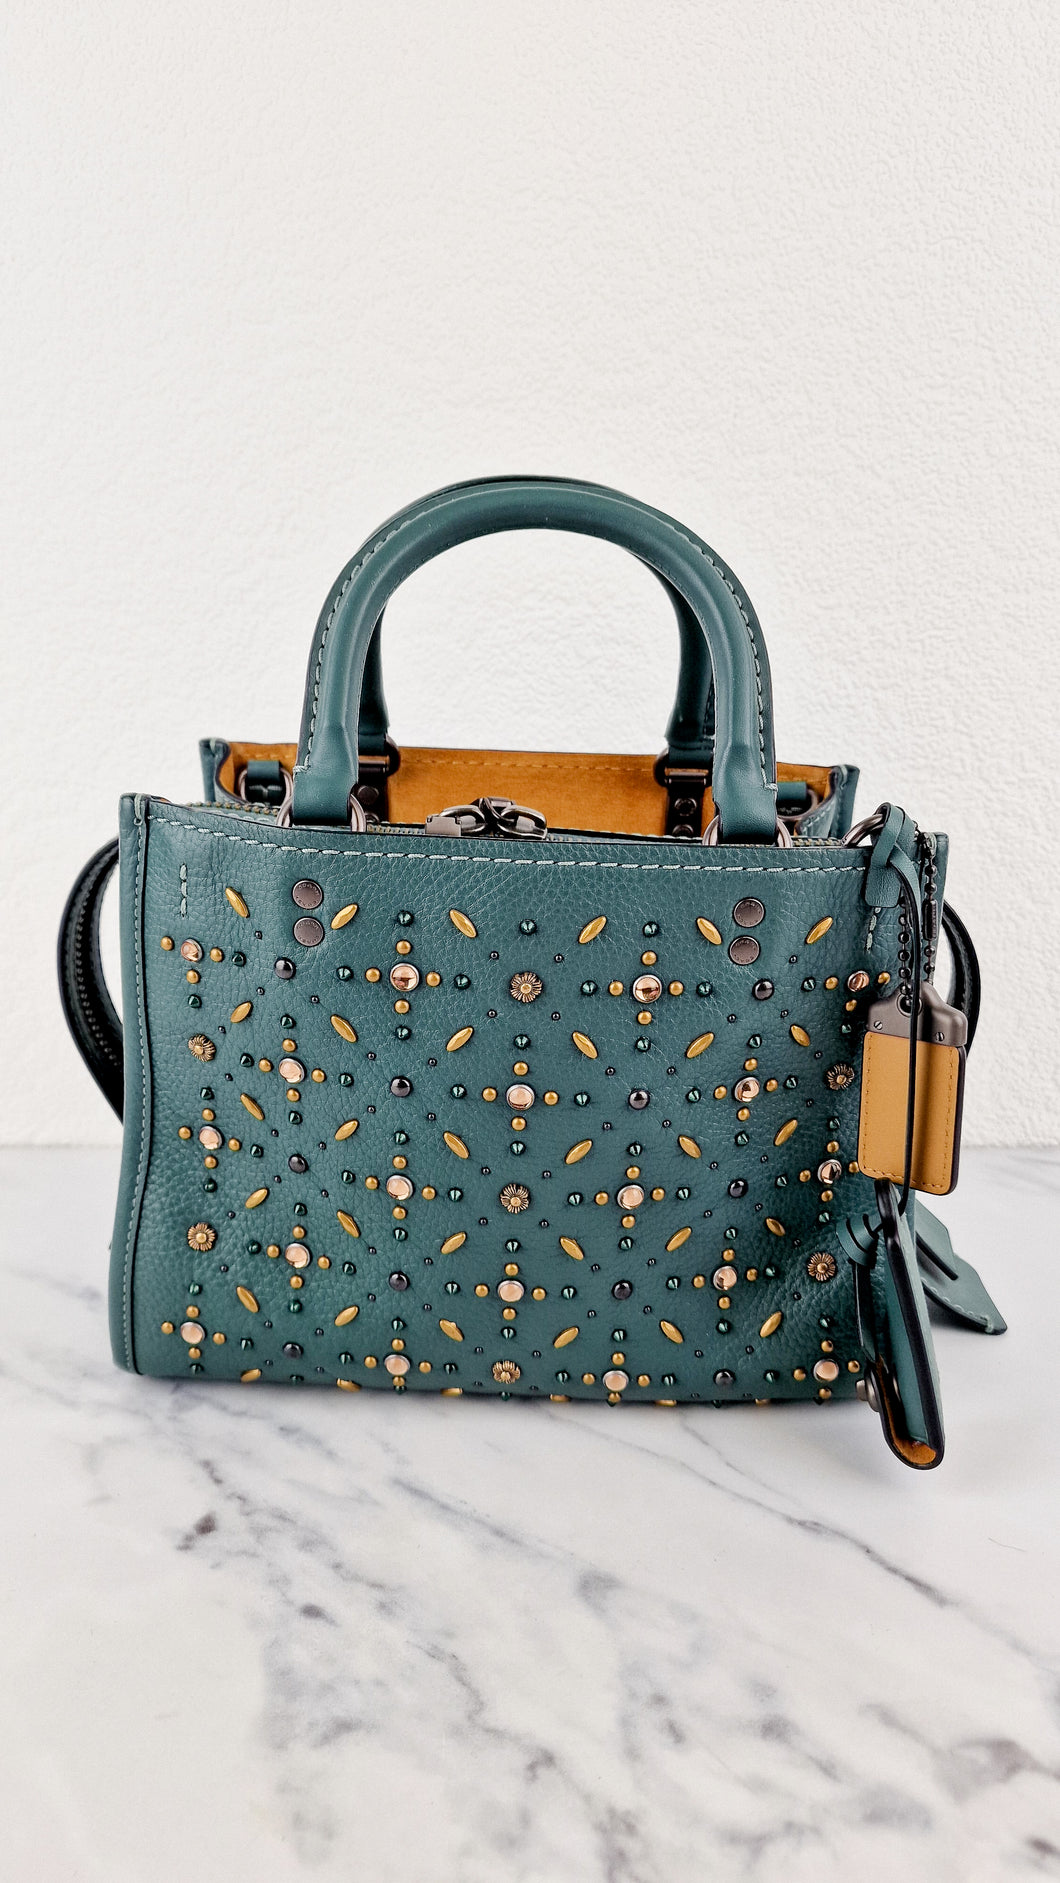 Coach 1941 Rogue 25 in Dark Turquoise With Prairie Rivets Pebble Leather Satchel - Coach 21590